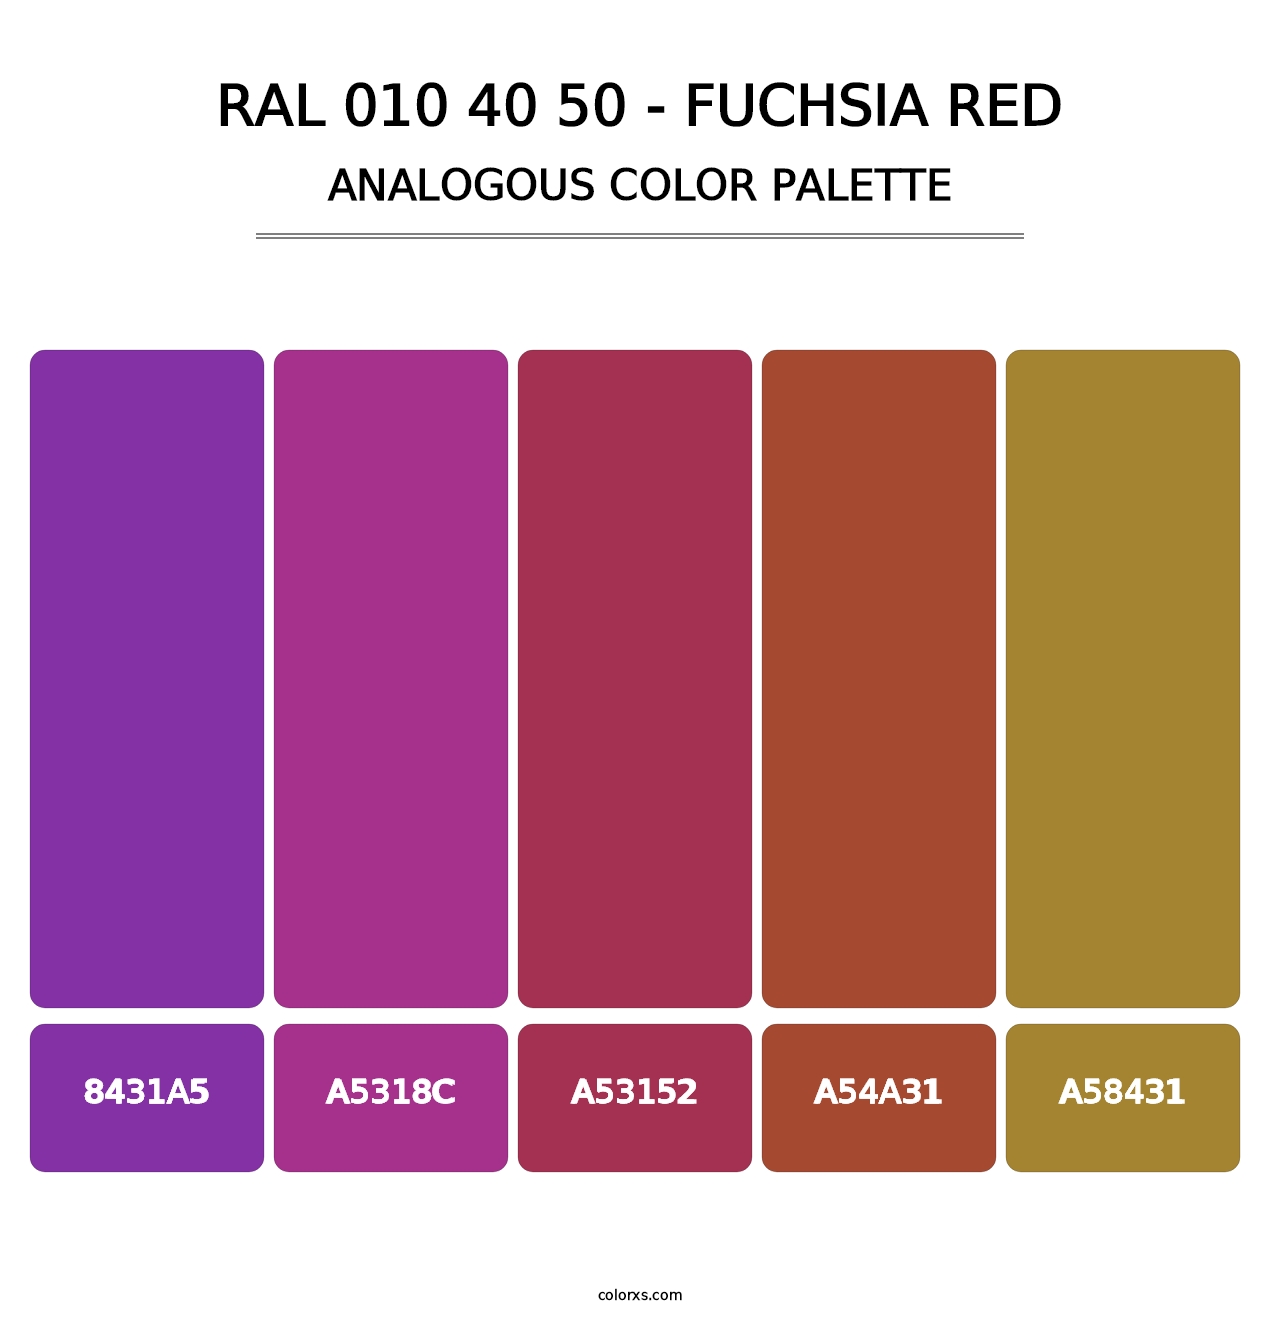 RAL 010 40 50 - Fuchsia Red - Analogous Color Palette